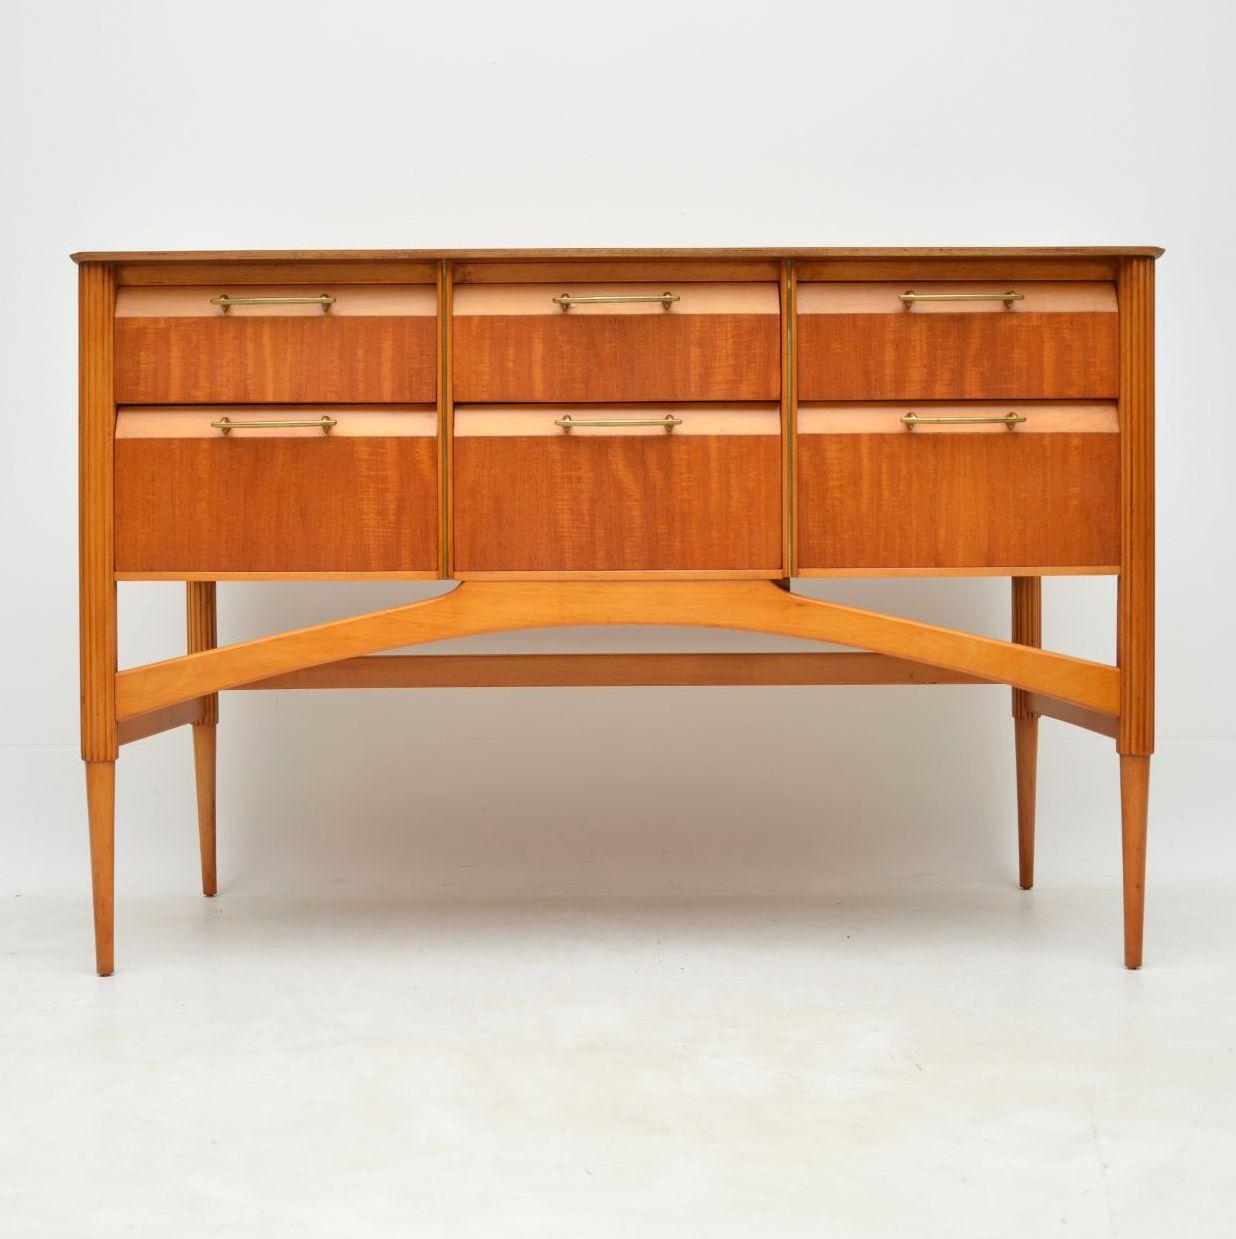 A beautiful and very well made vintage sideboard in satinwood, with brass handles. This dates from the 1950-1960s, we have had it stripped and re-polished to a very high standard, the condition is superb throughout. Its a useful size, elegant and